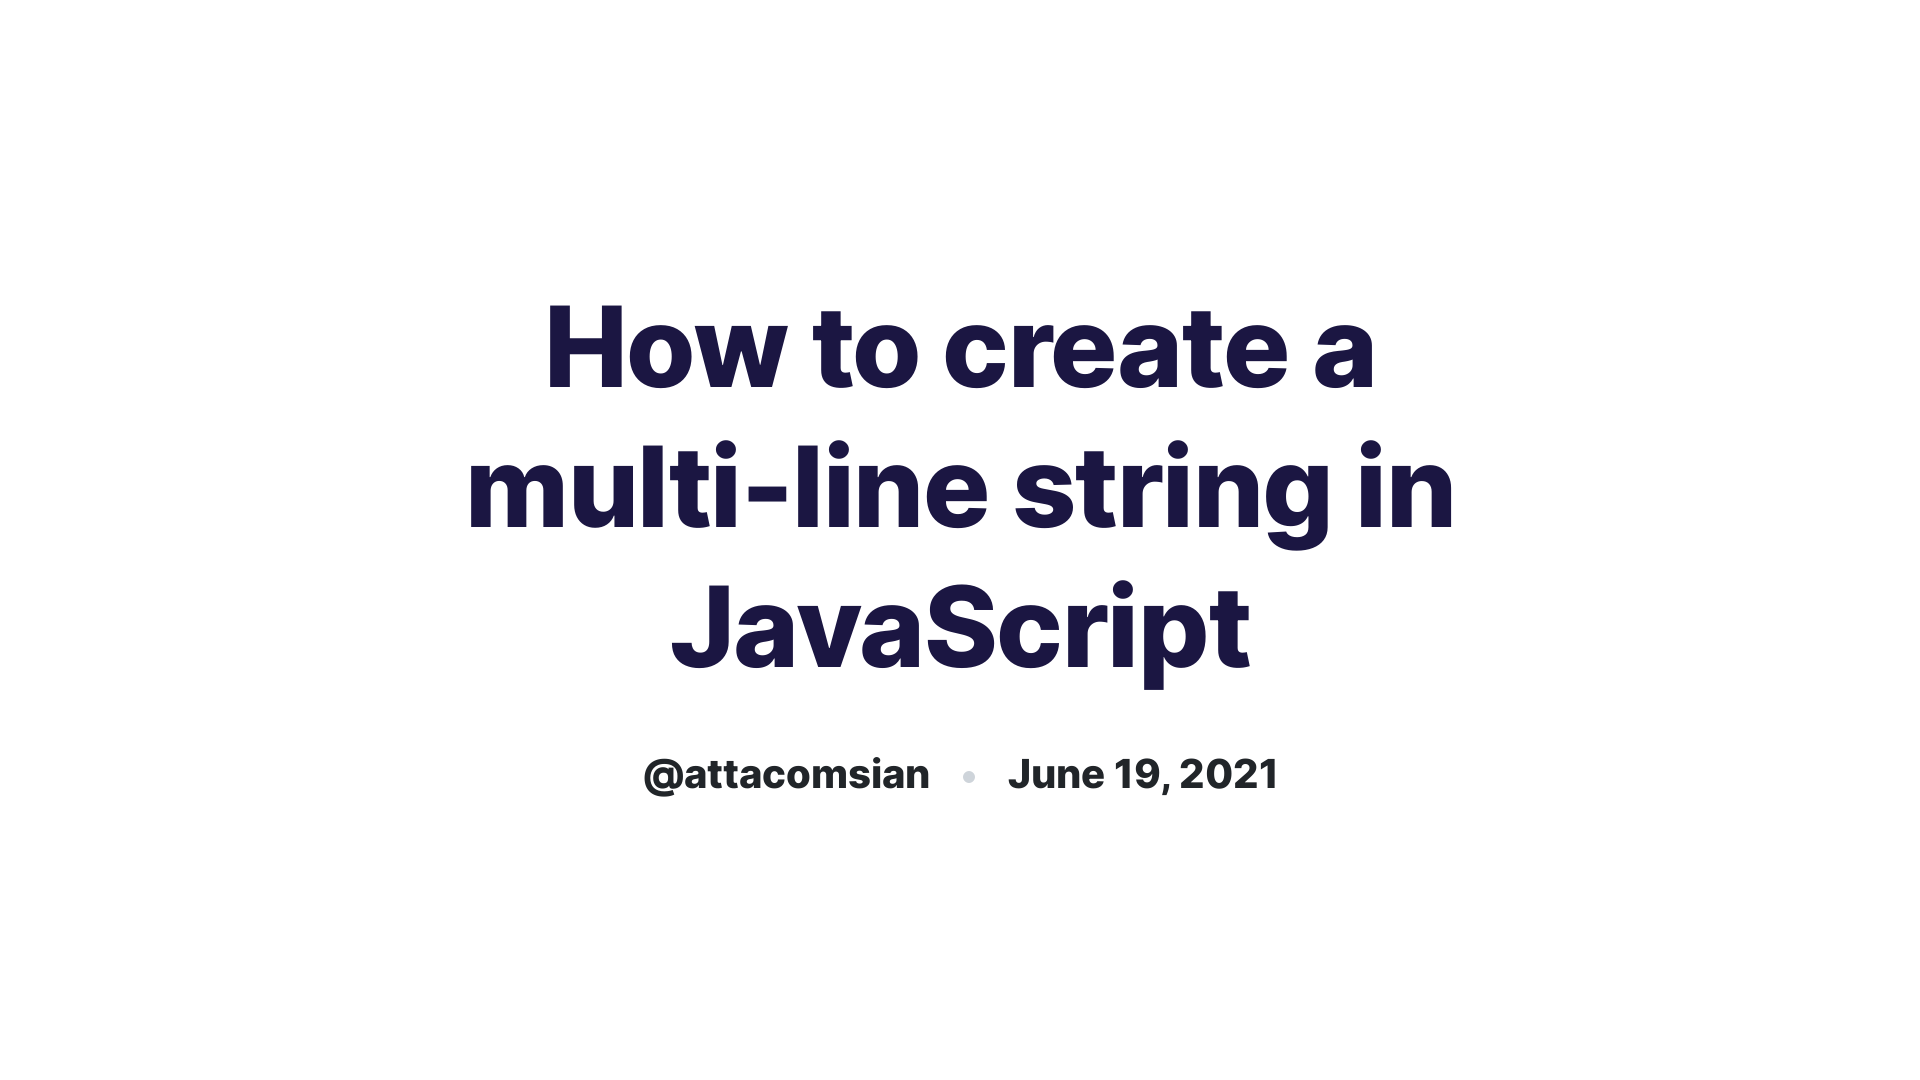 js multiple assignment one line